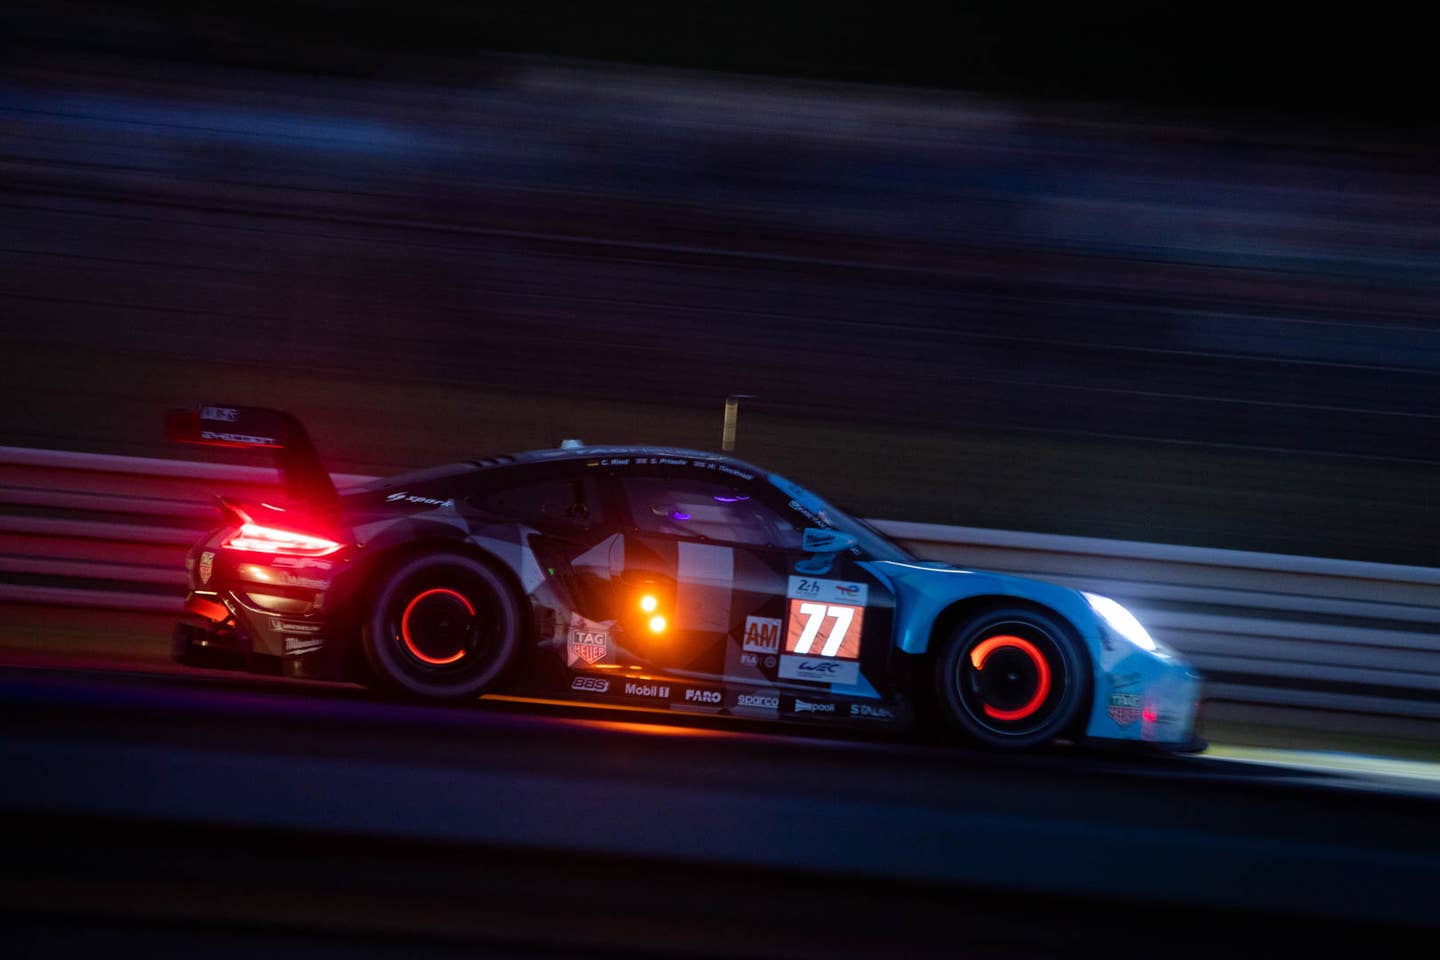 LE MANS, FRANCE - JUNE 11: The #77 Dempsey-Proton Racing, Porsche 911 RSR of Christian Ried, Sebastian Priaulx, and Harry Tincknell in action at the Le Mans 24 Hours Race on June 11, 2022 in Le Mans, France. (Photo by James Moy Photography/Getty Images)